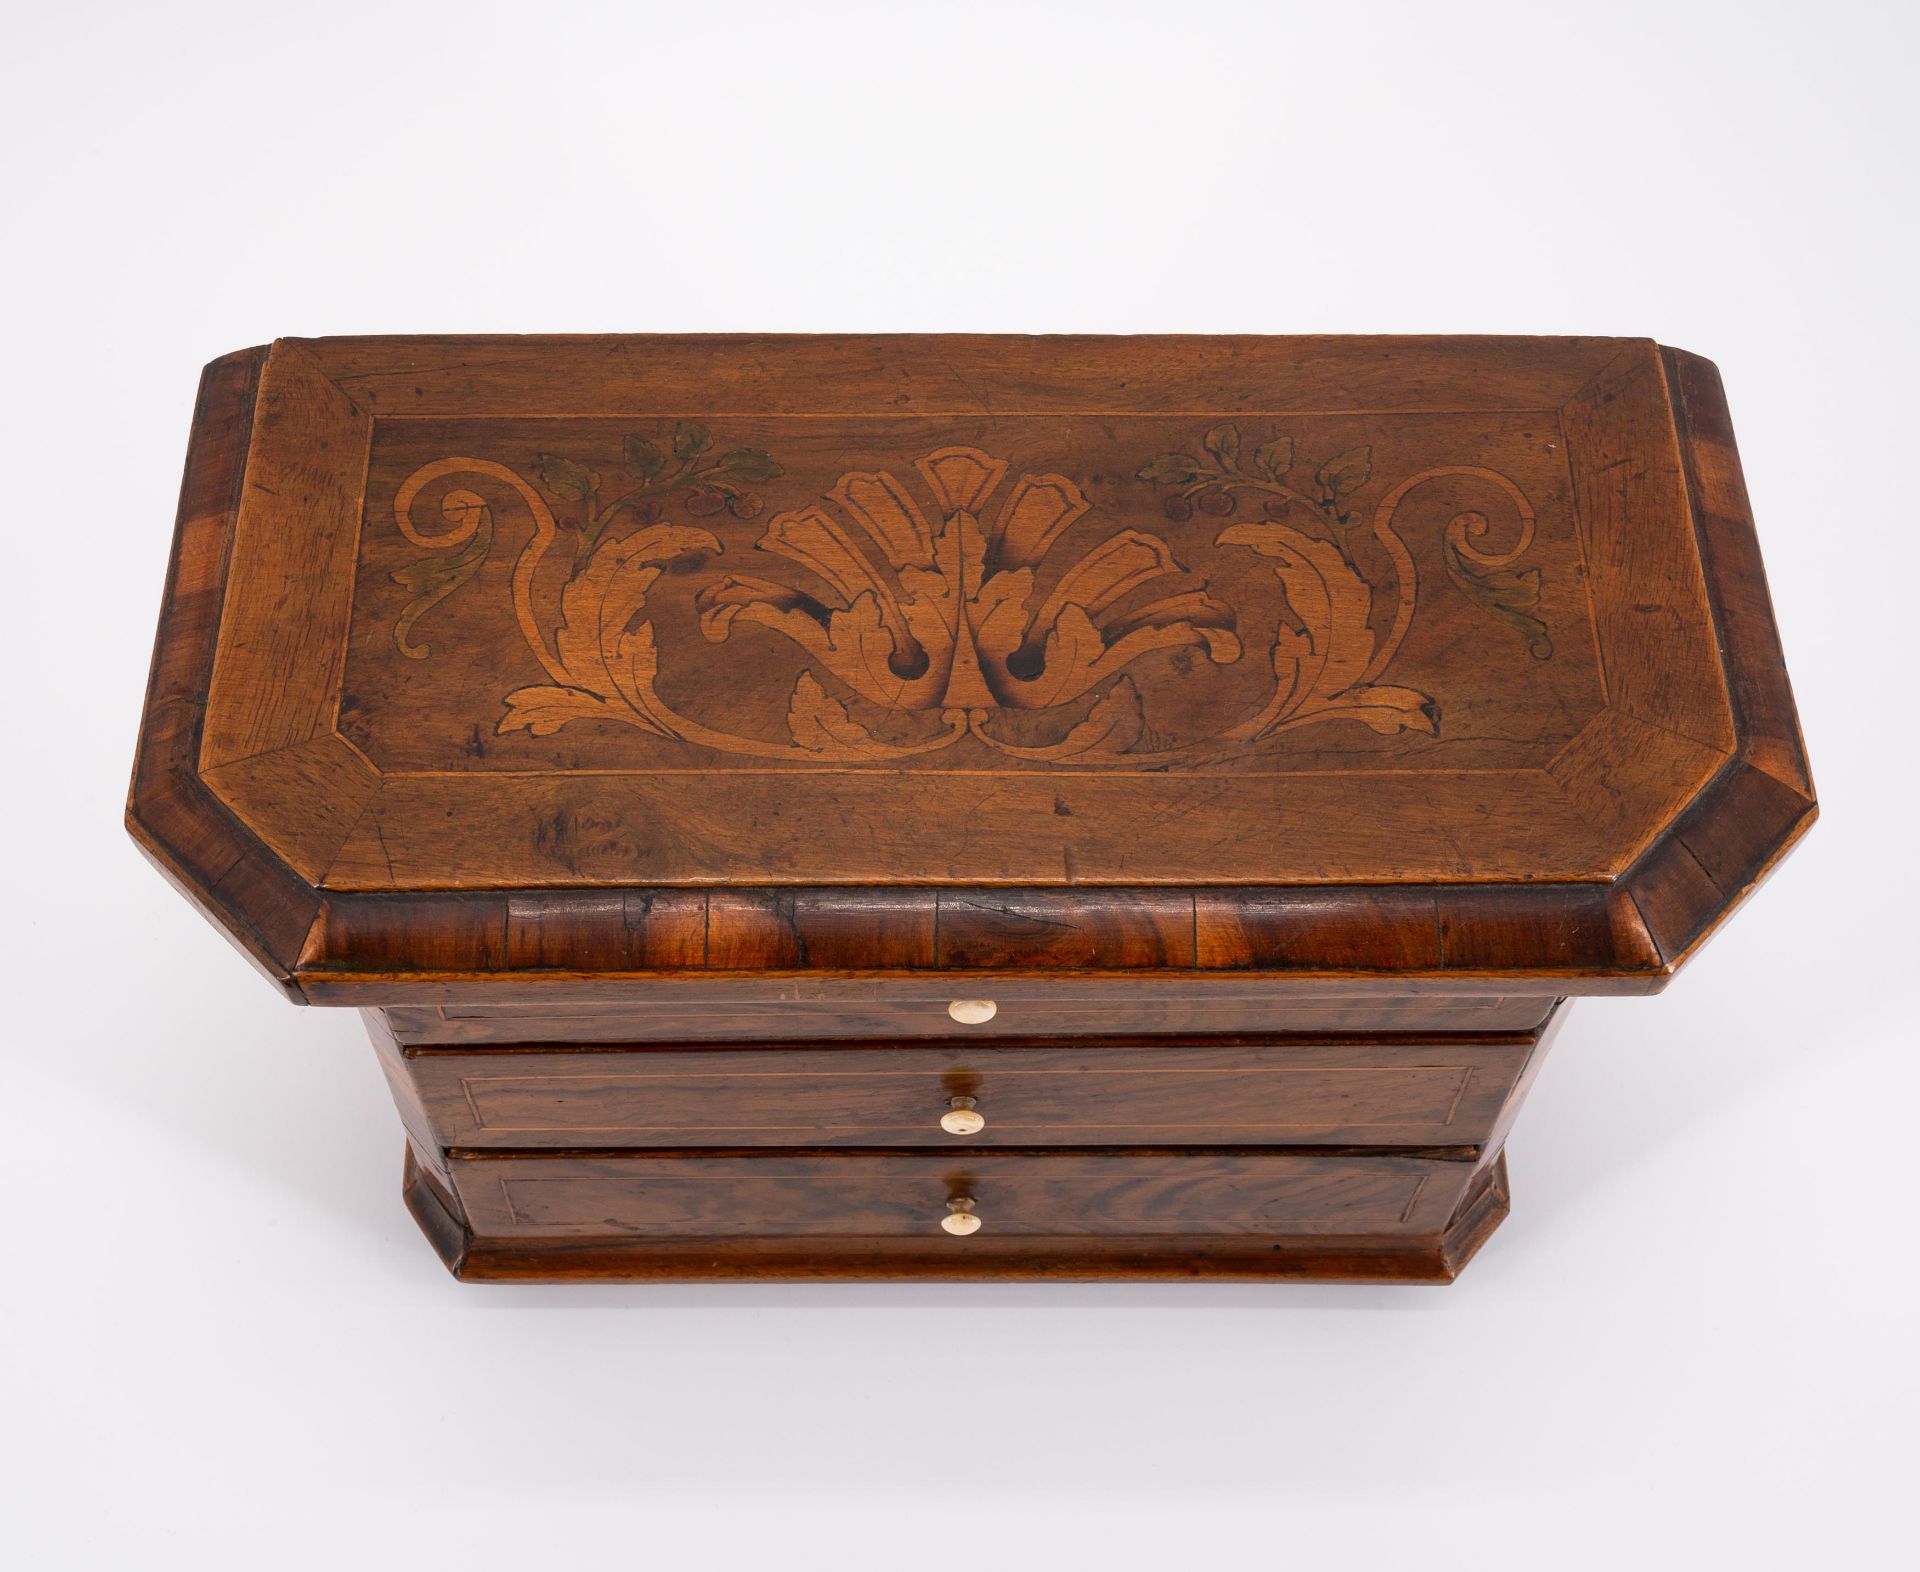 Germany: SMALL MODEL CHEST OF DRAWERS WITH FLORAL INLAYS MADE OF WOOD AND BONE - Image 6 of 7